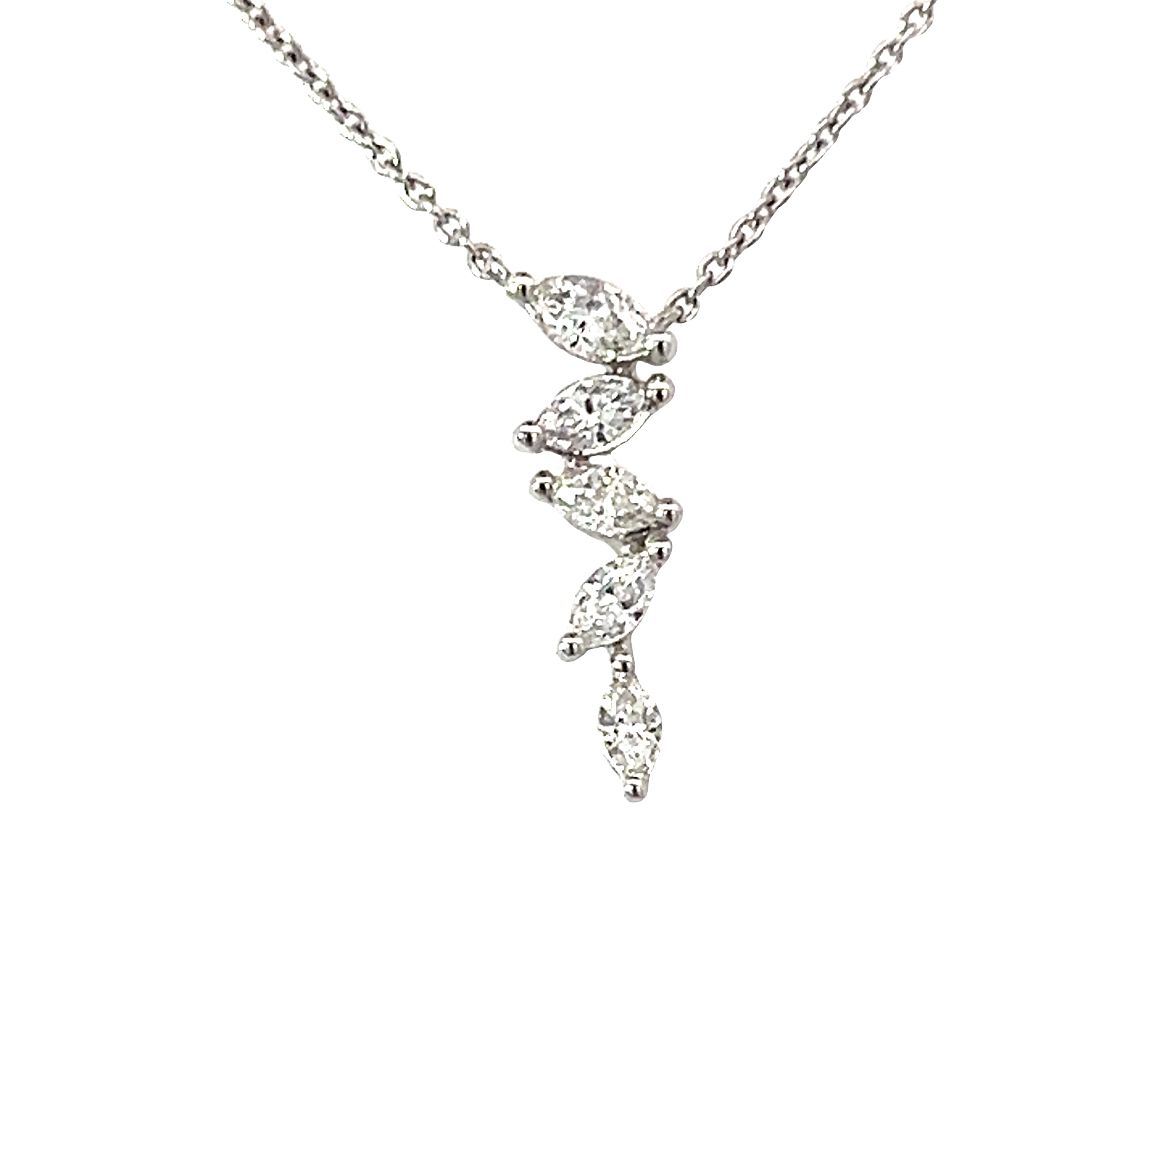 18 Carat White Gold Icicle Drop Necklace - 0.24 Carats